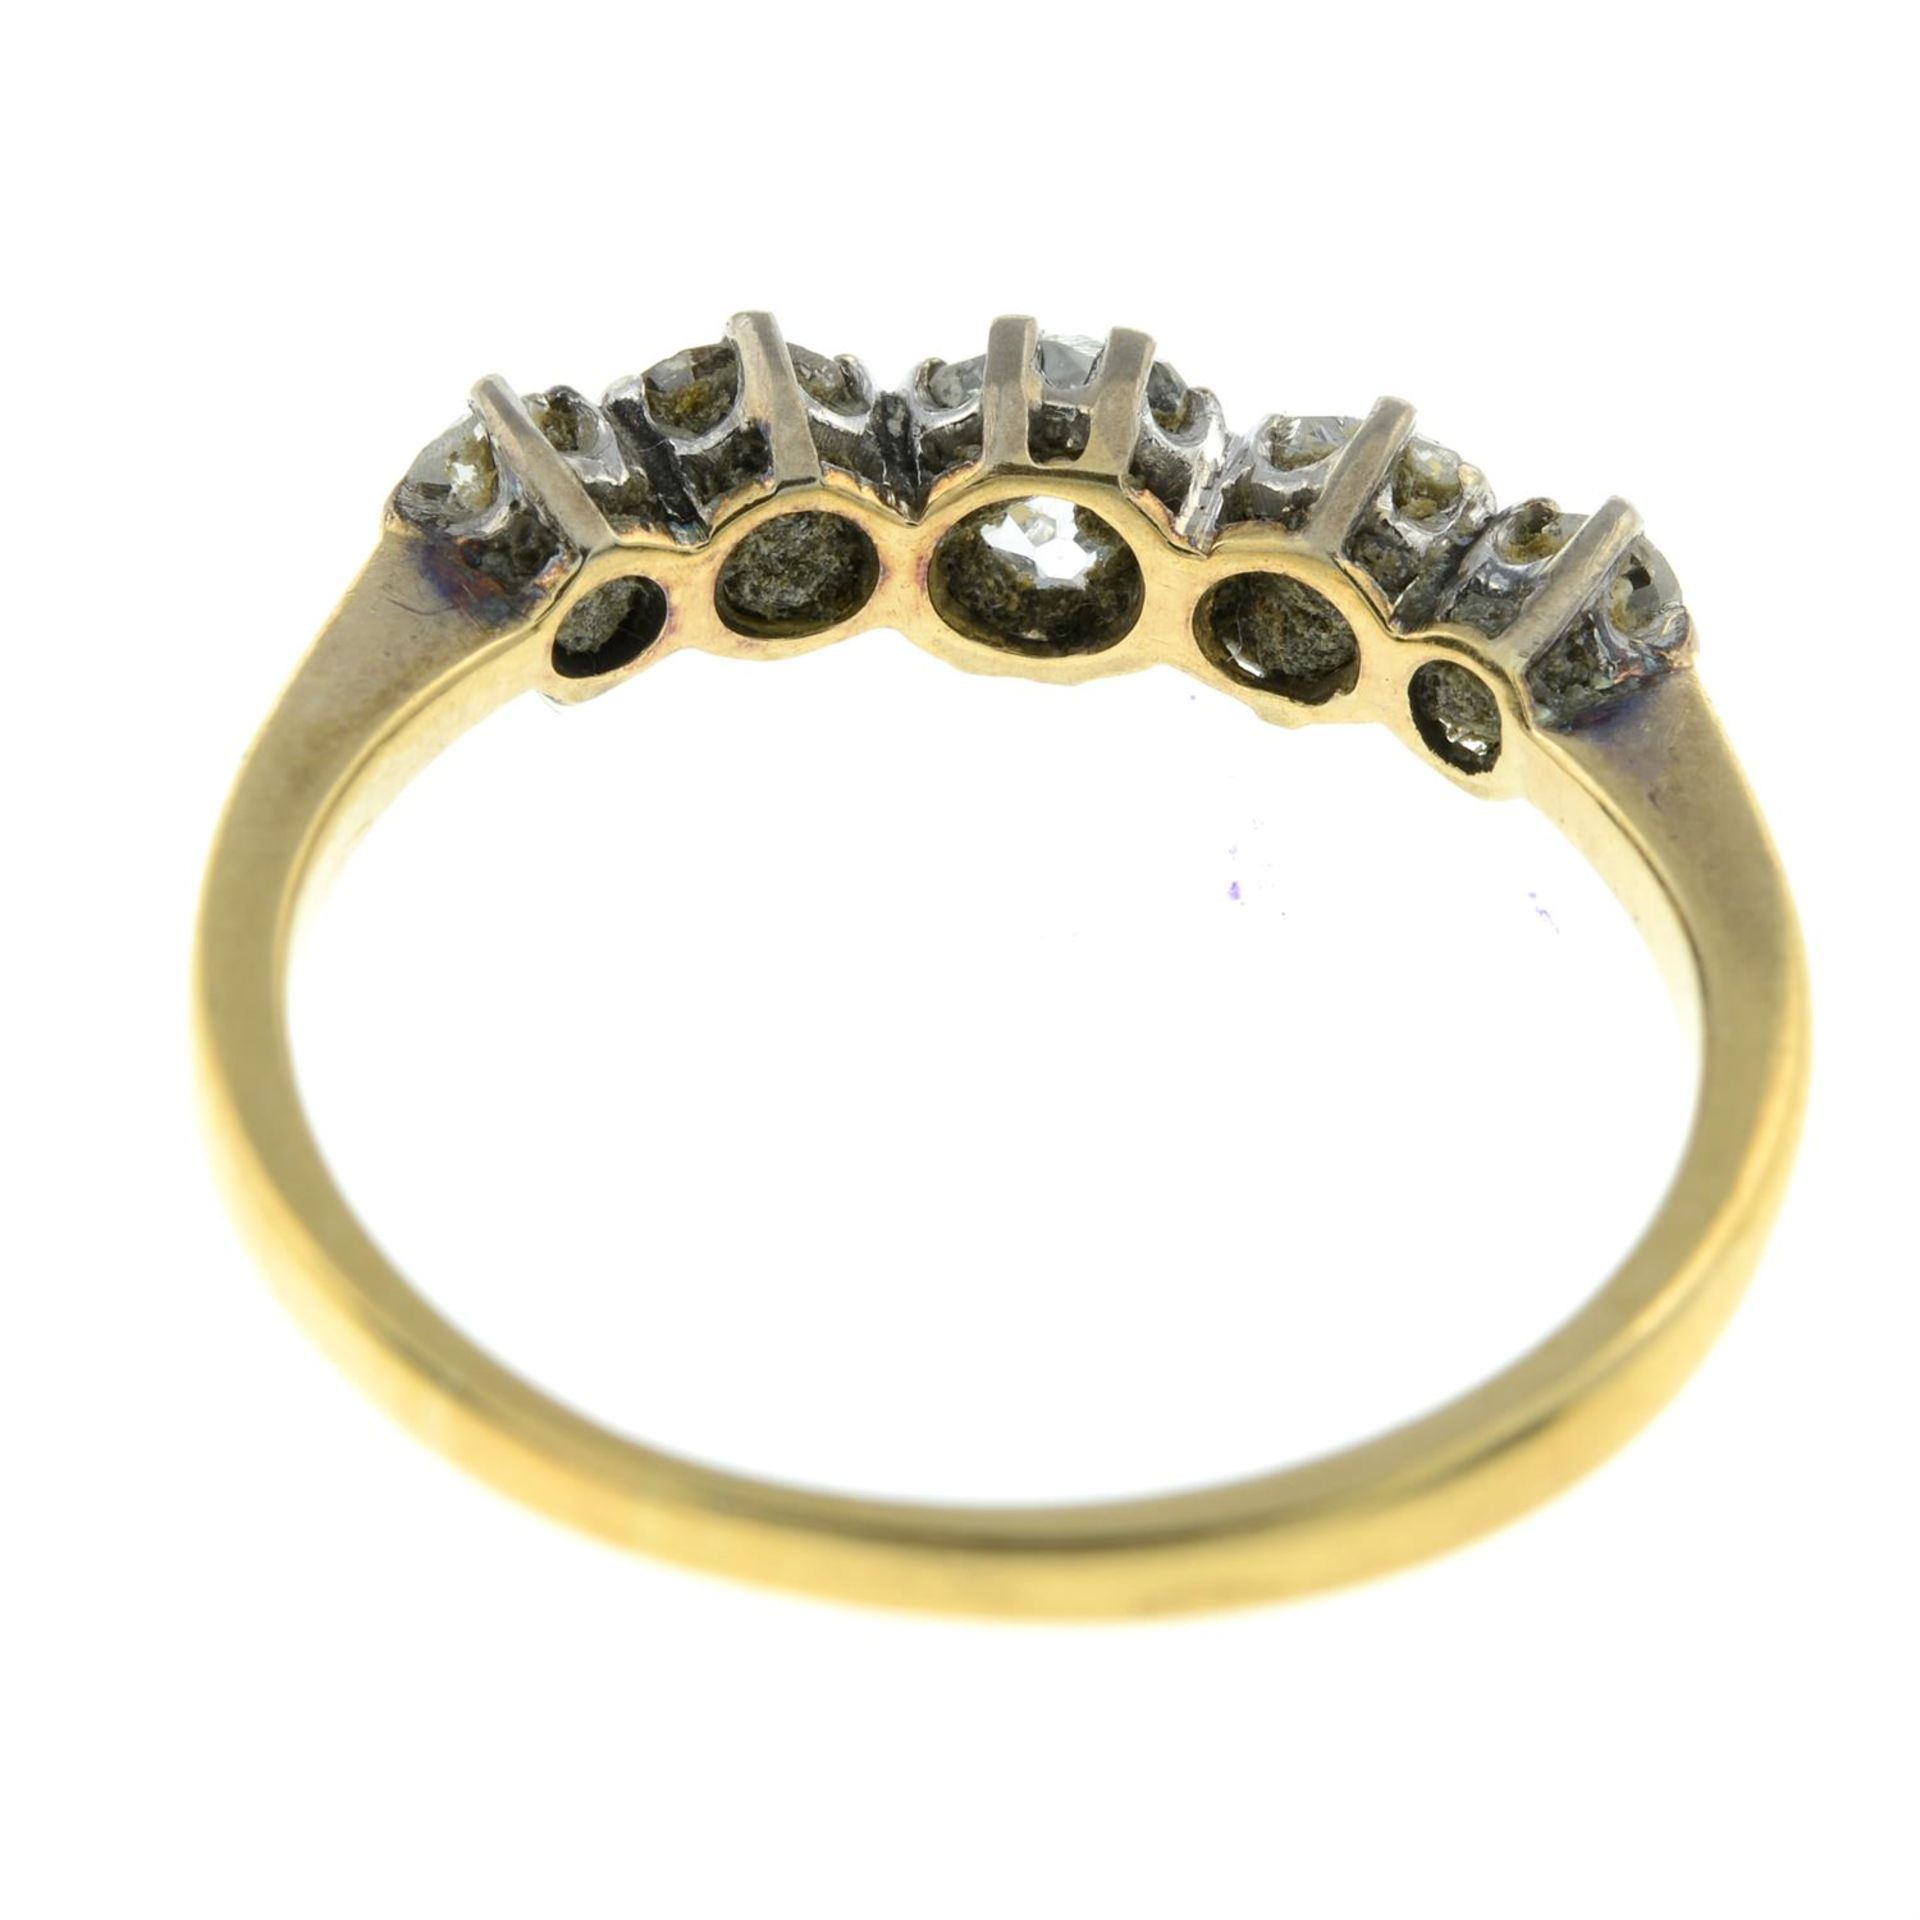 Early 20th century 18ct gold & platinum old-cut diamond ring. - Image 2 of 2